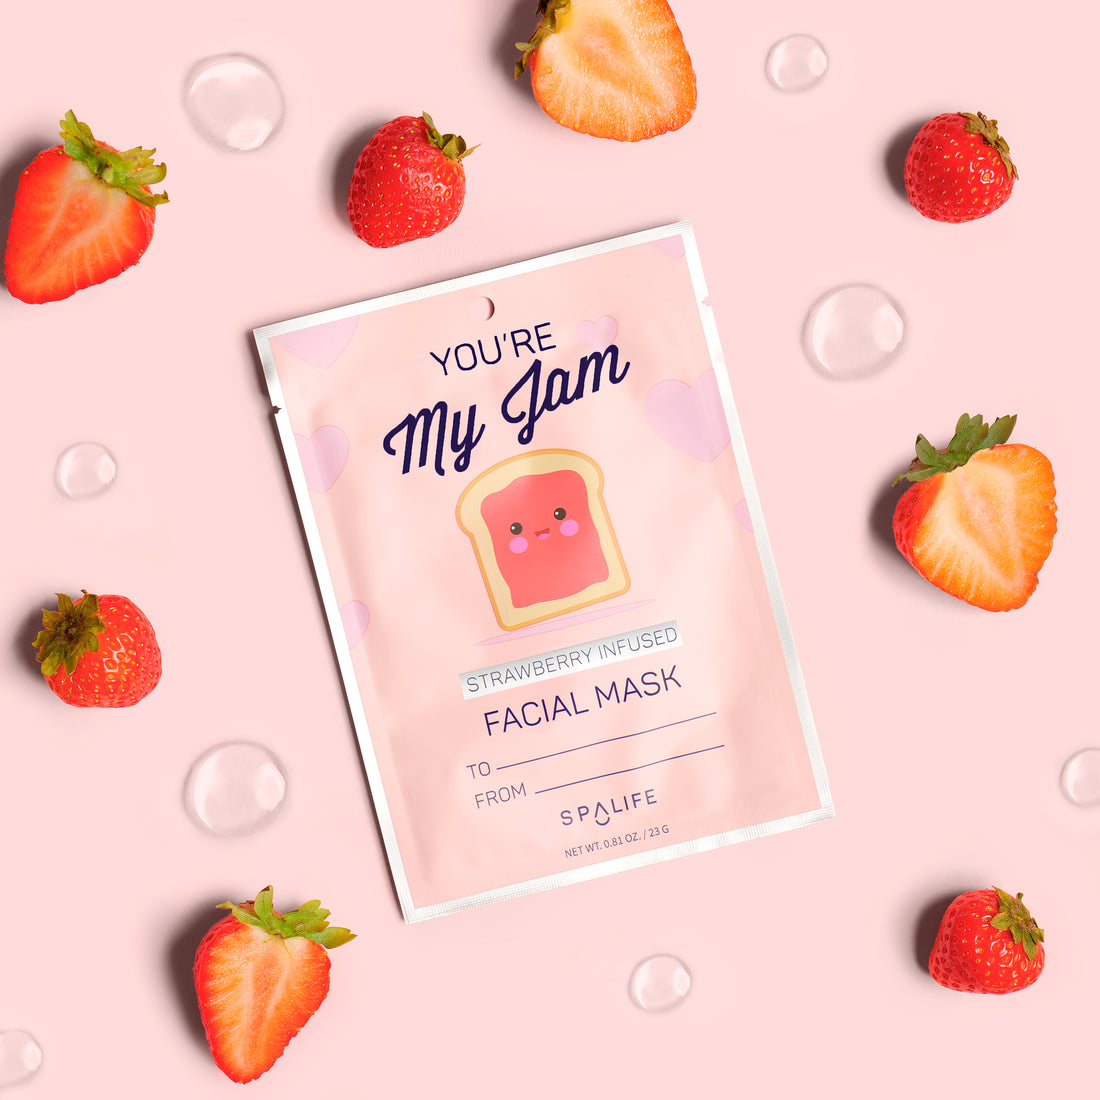 Strawberry Infused Facial Mask-17